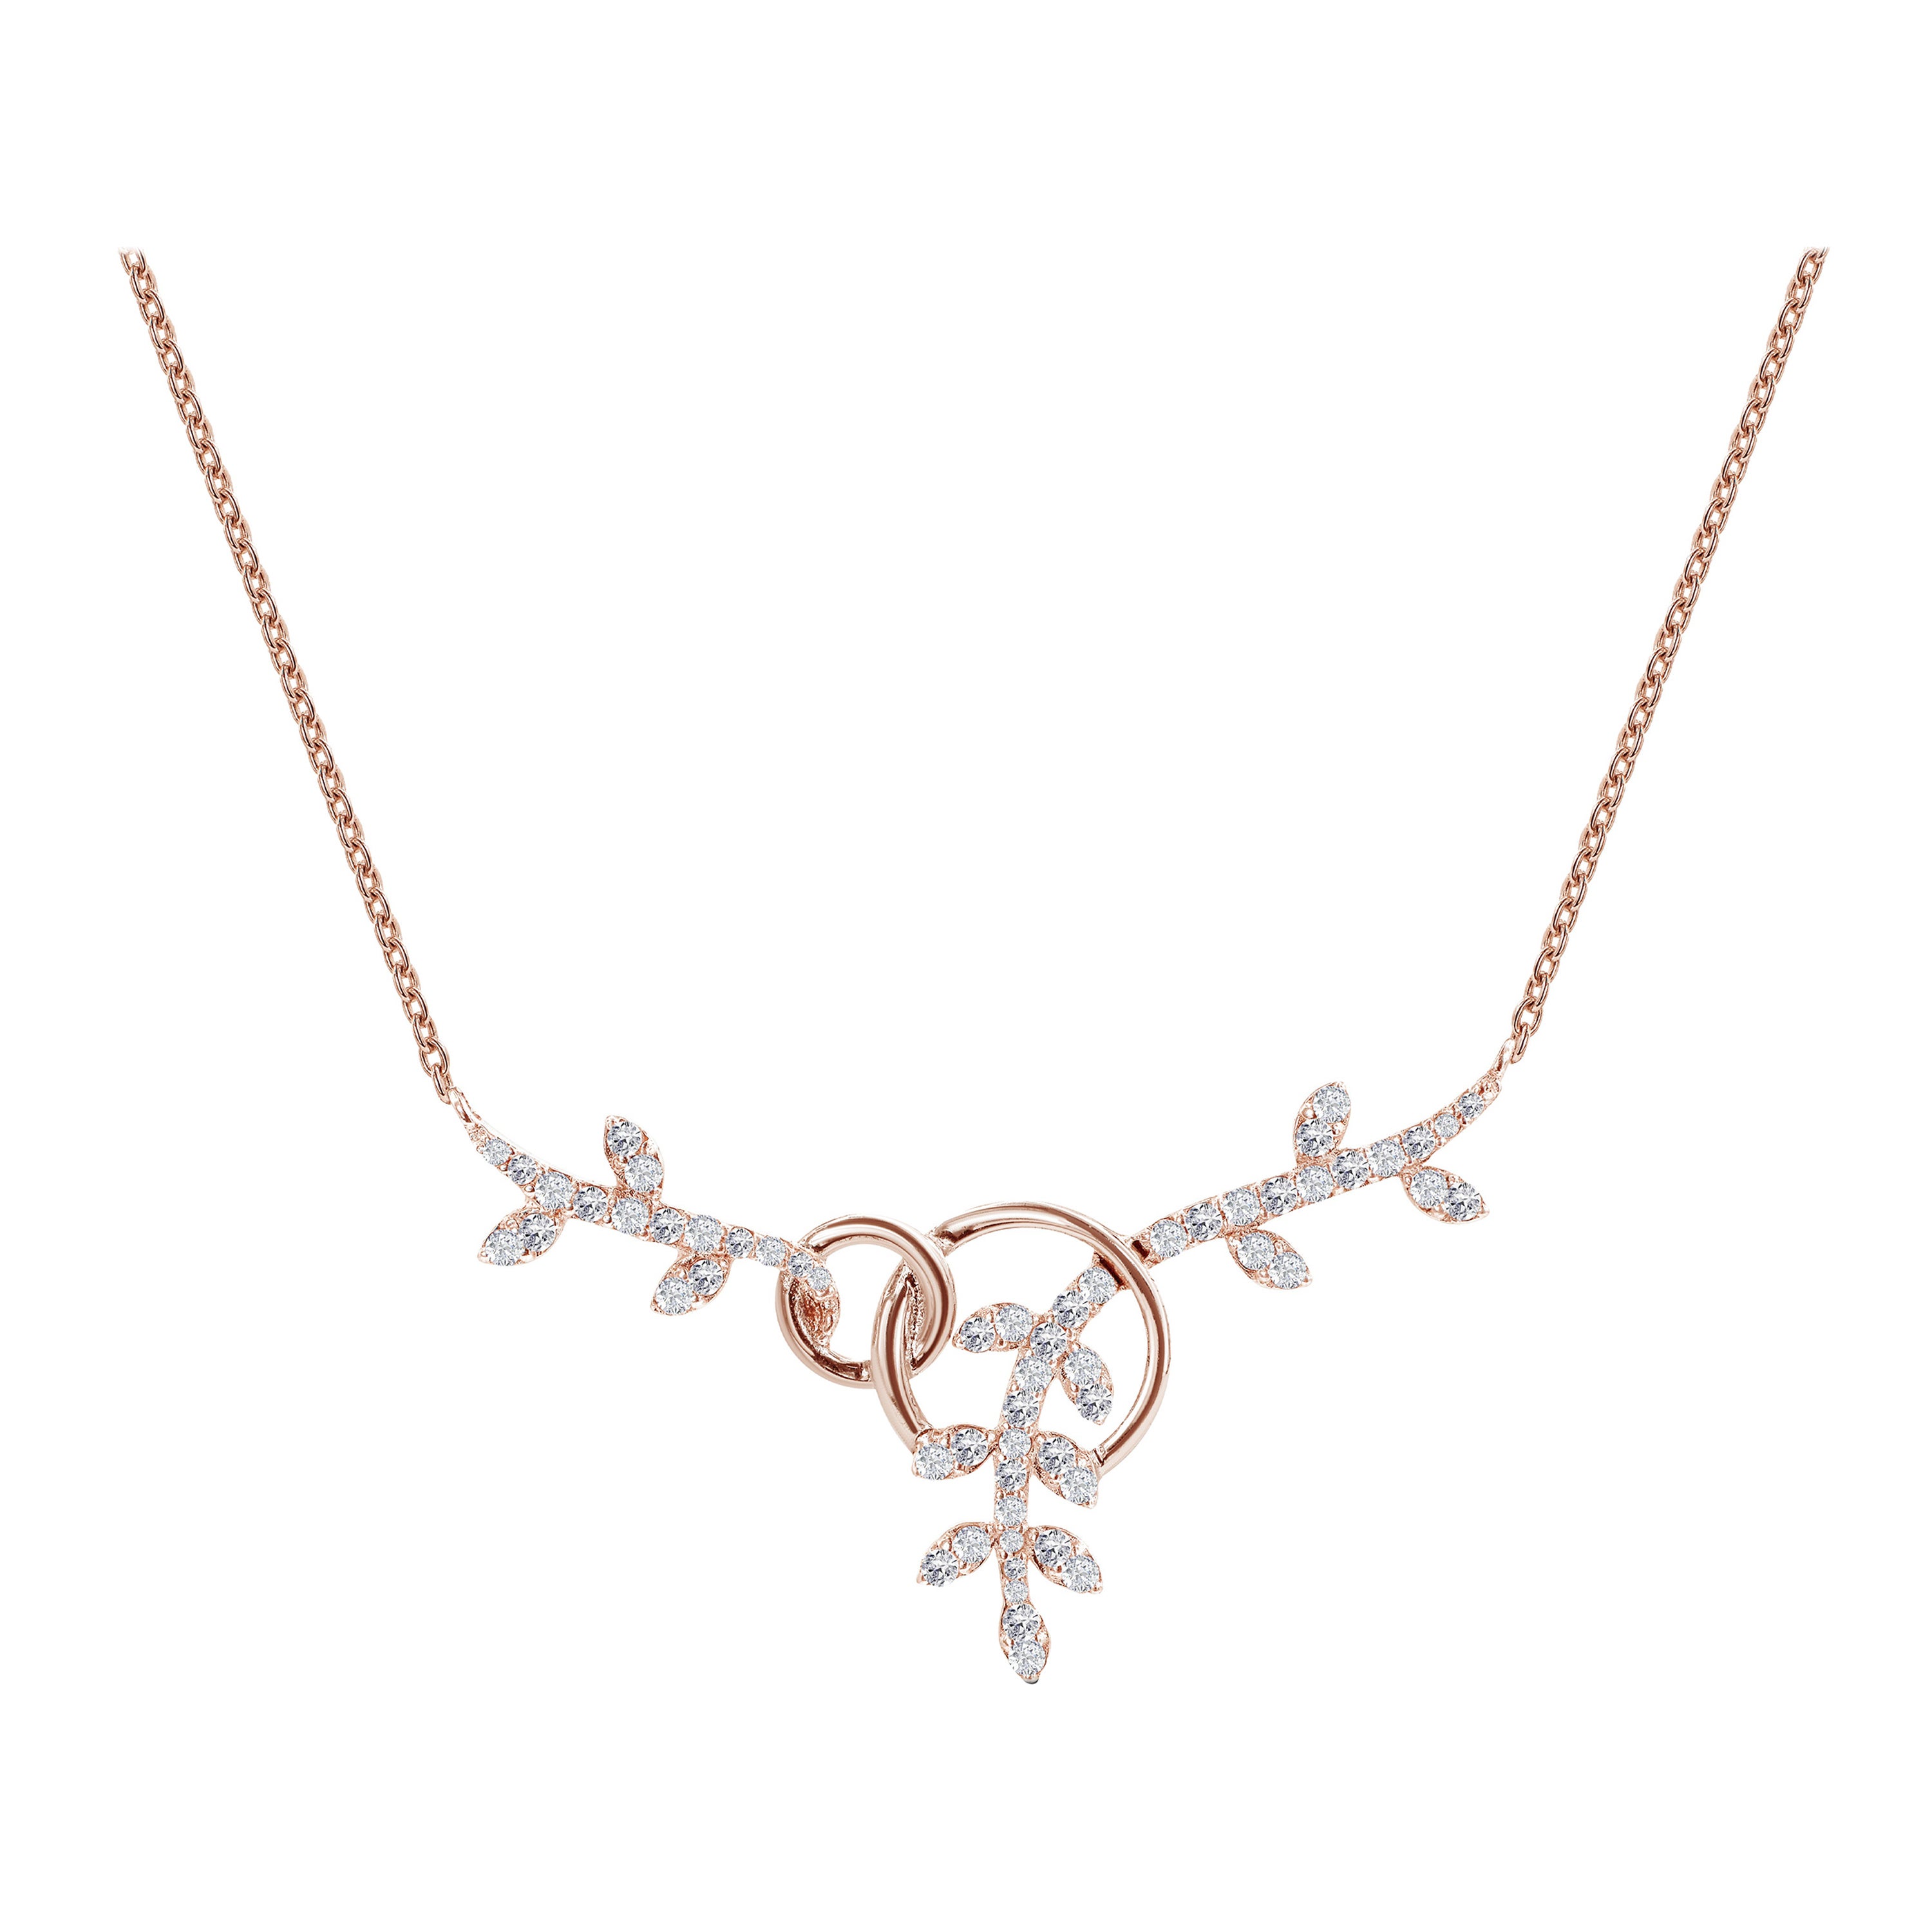 0.41 Ct Diamond Leaf Necklace in 14K Gold